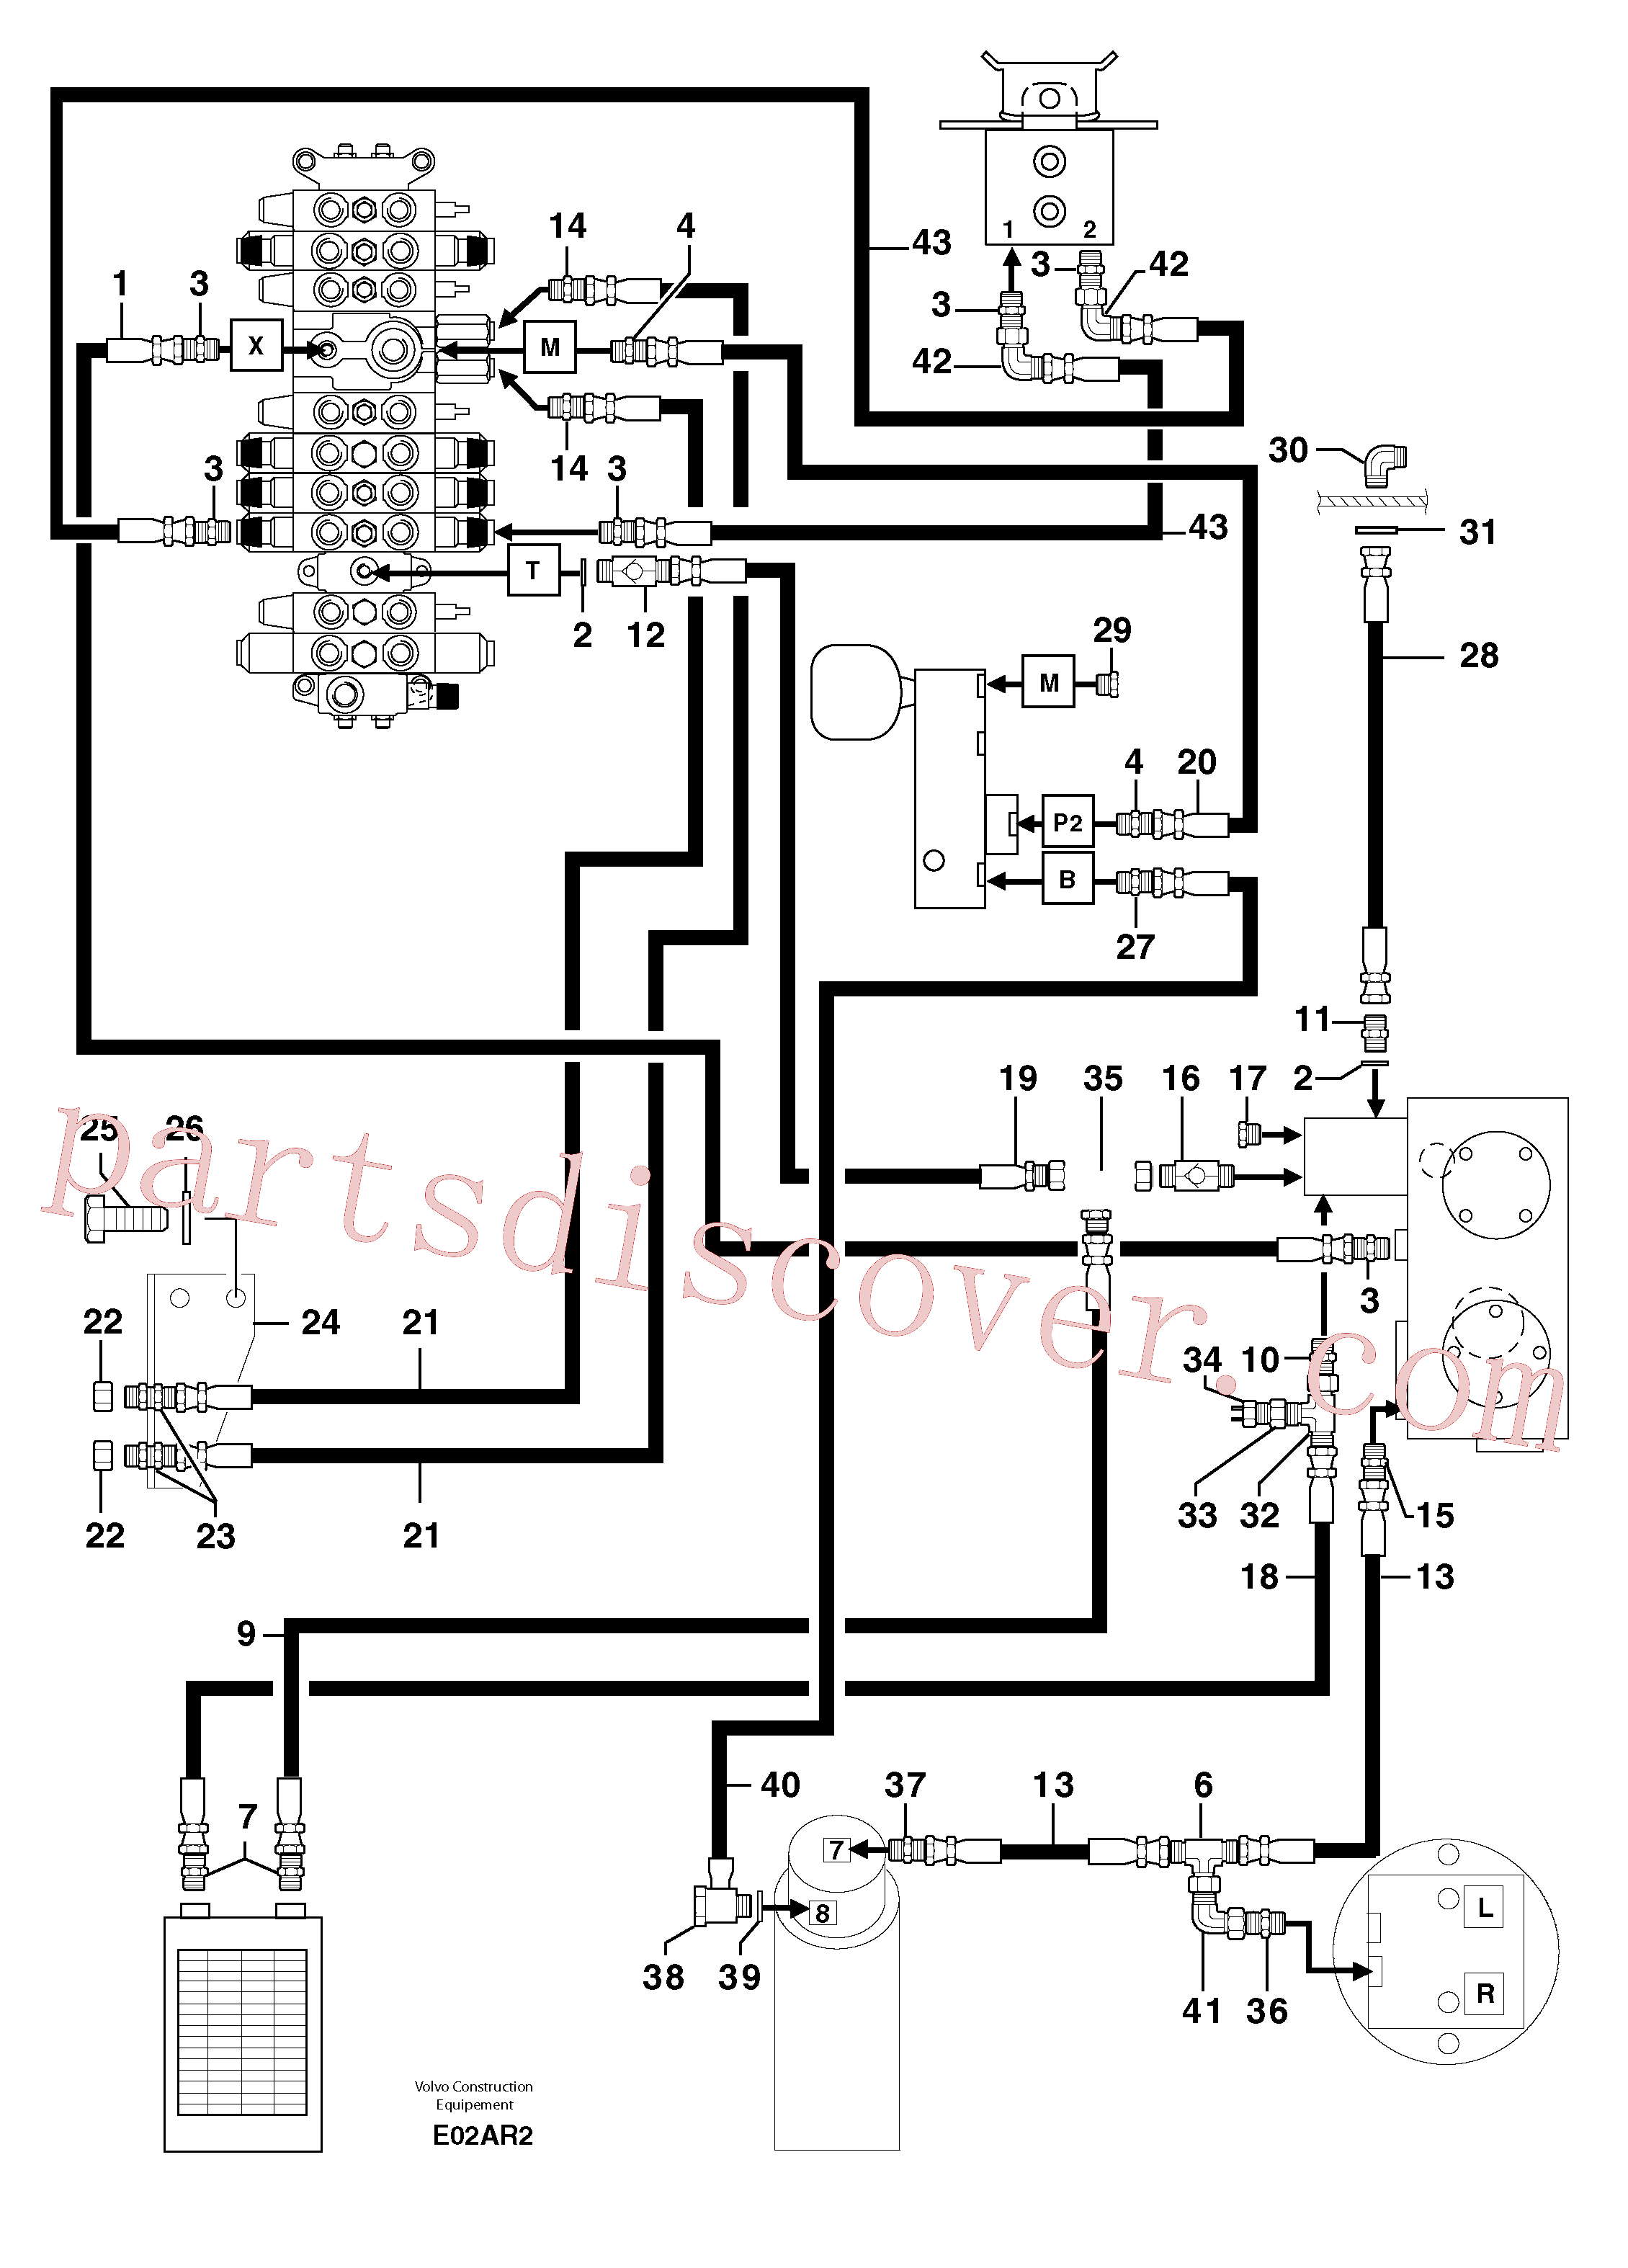 PJ4192439 for Volvo Attachments supply and return circuit(E02AR2 assembly)